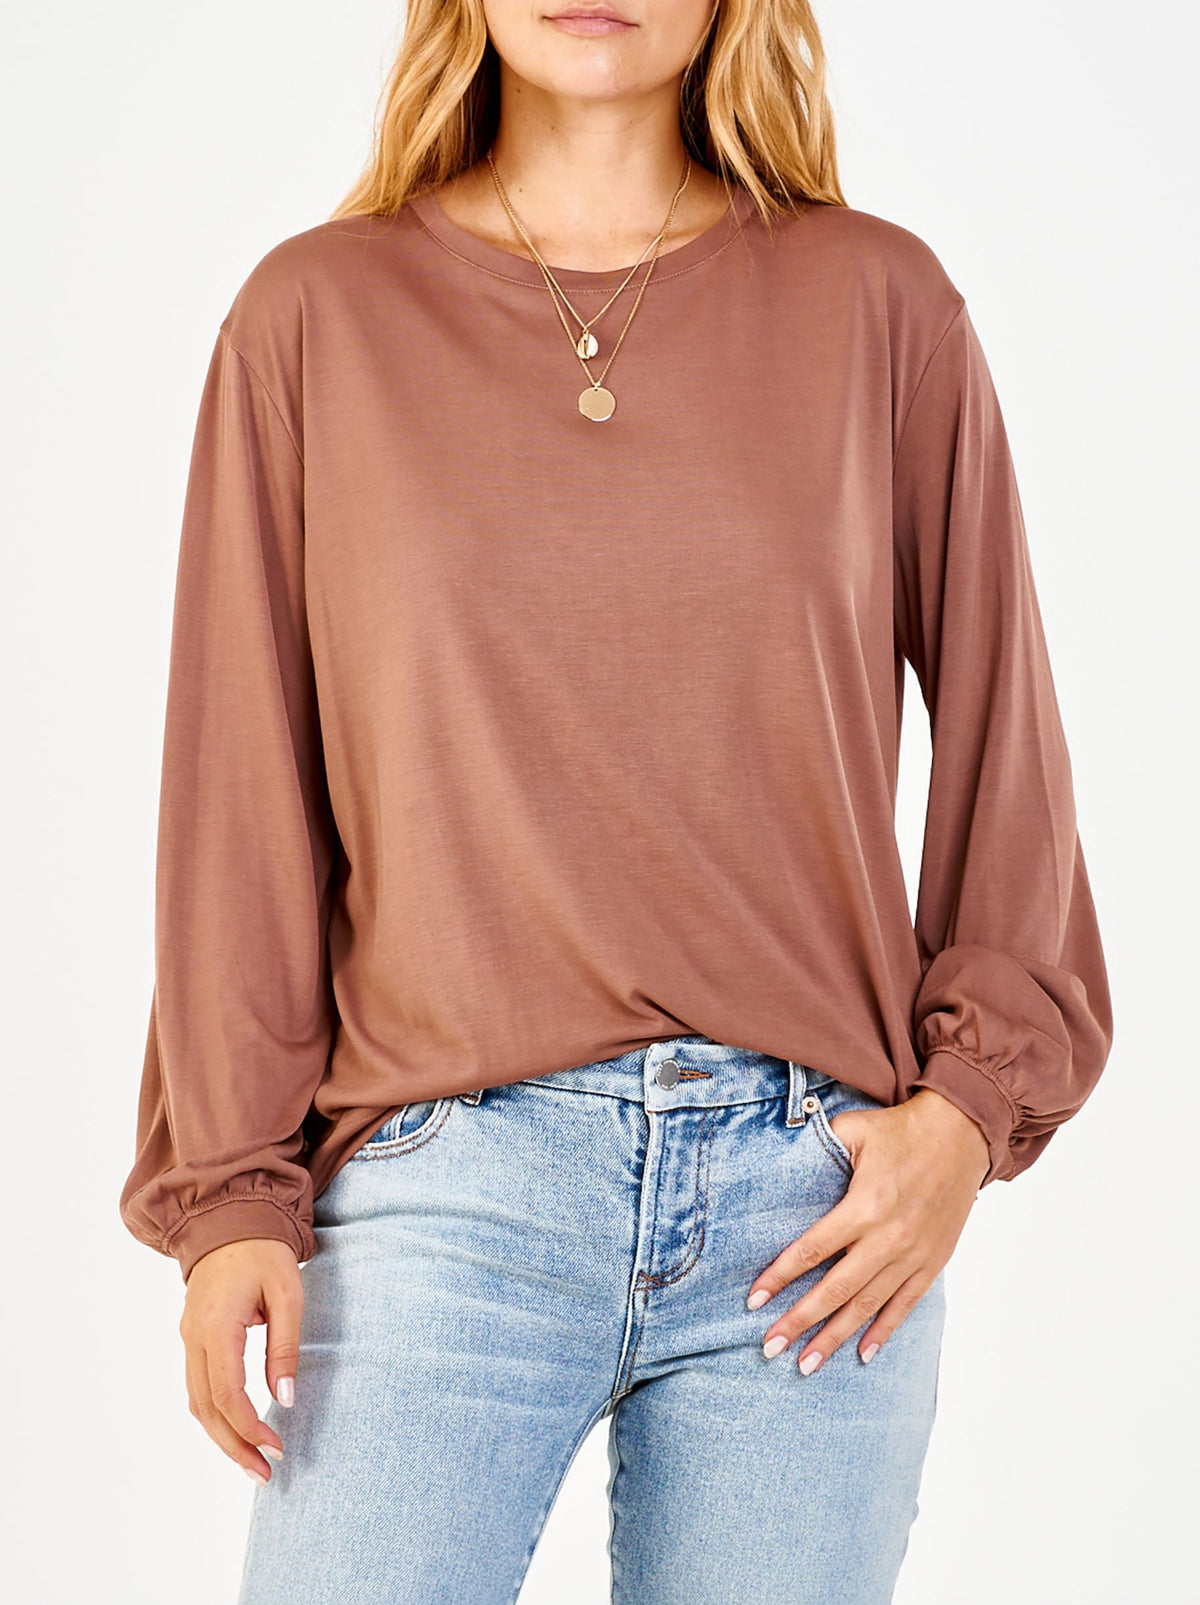 matilda-basic-long-sleeve-top-sable-front-image-another-love-clothing